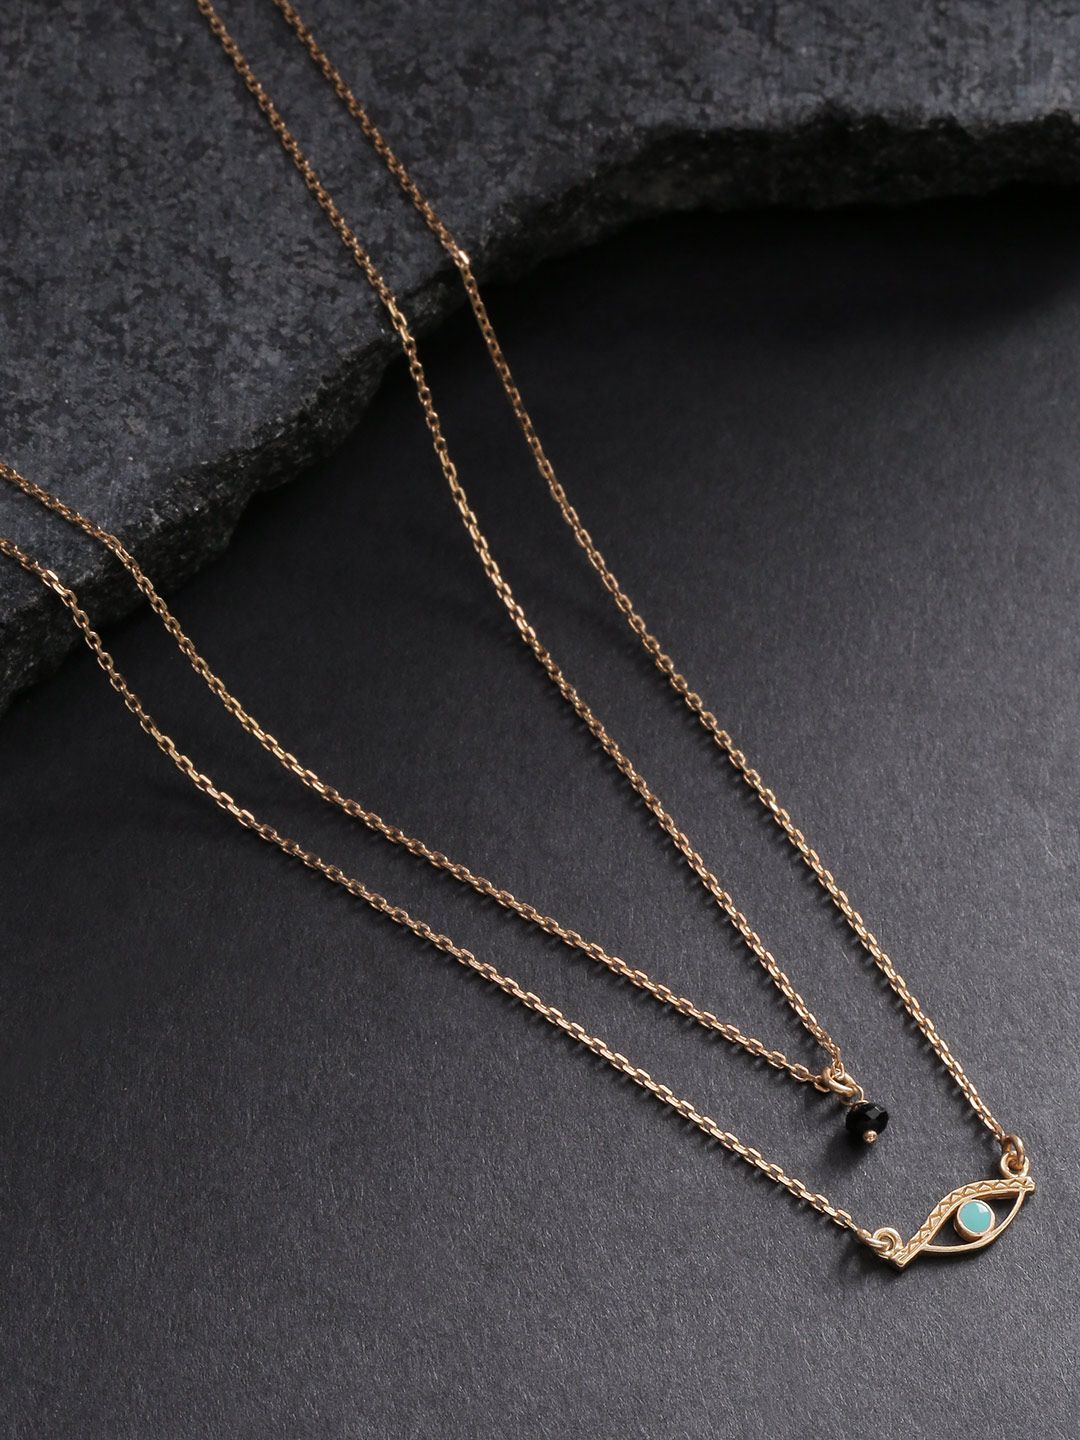 Carlton London Black Gold-Plated Layered Necklace Price in India